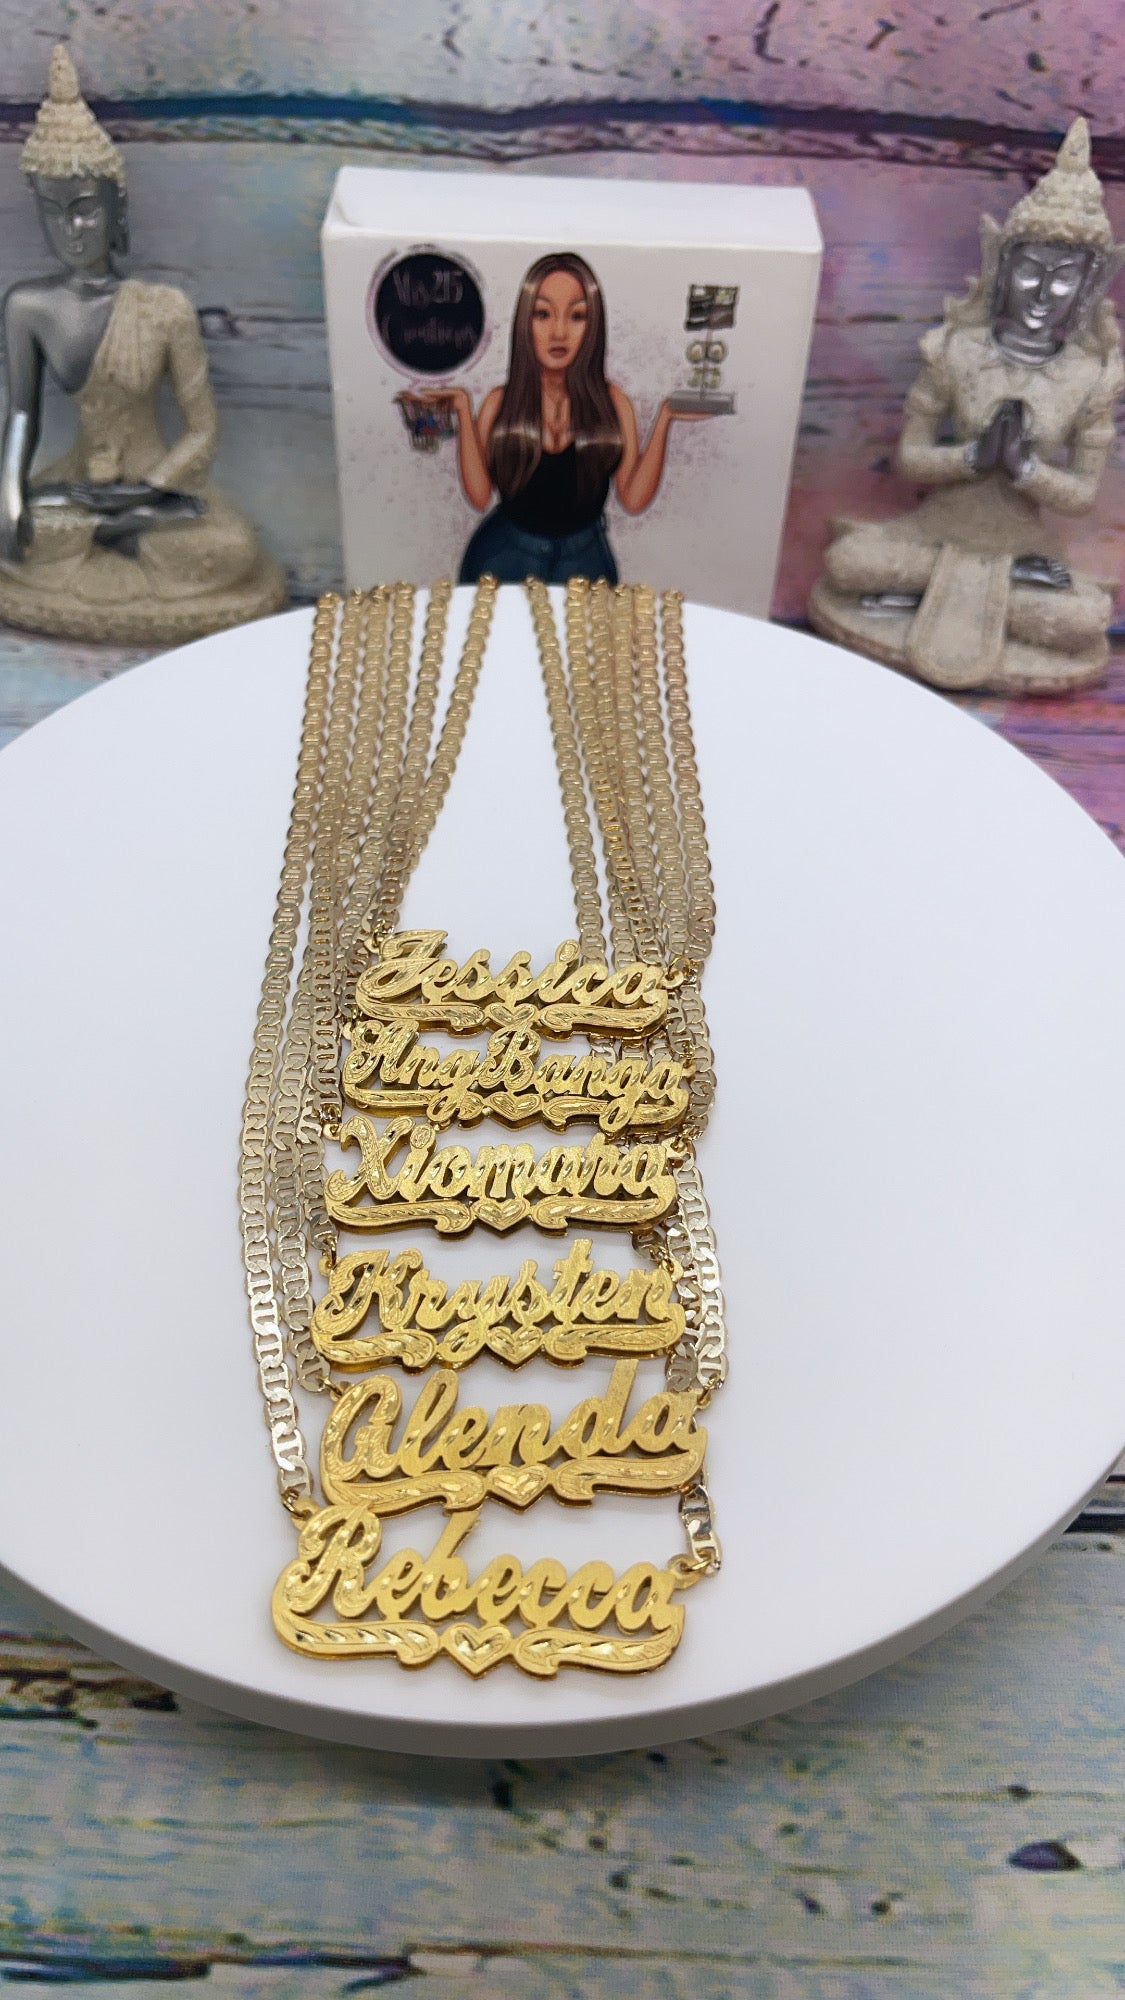 All gold or Silver plated double plated name necklace